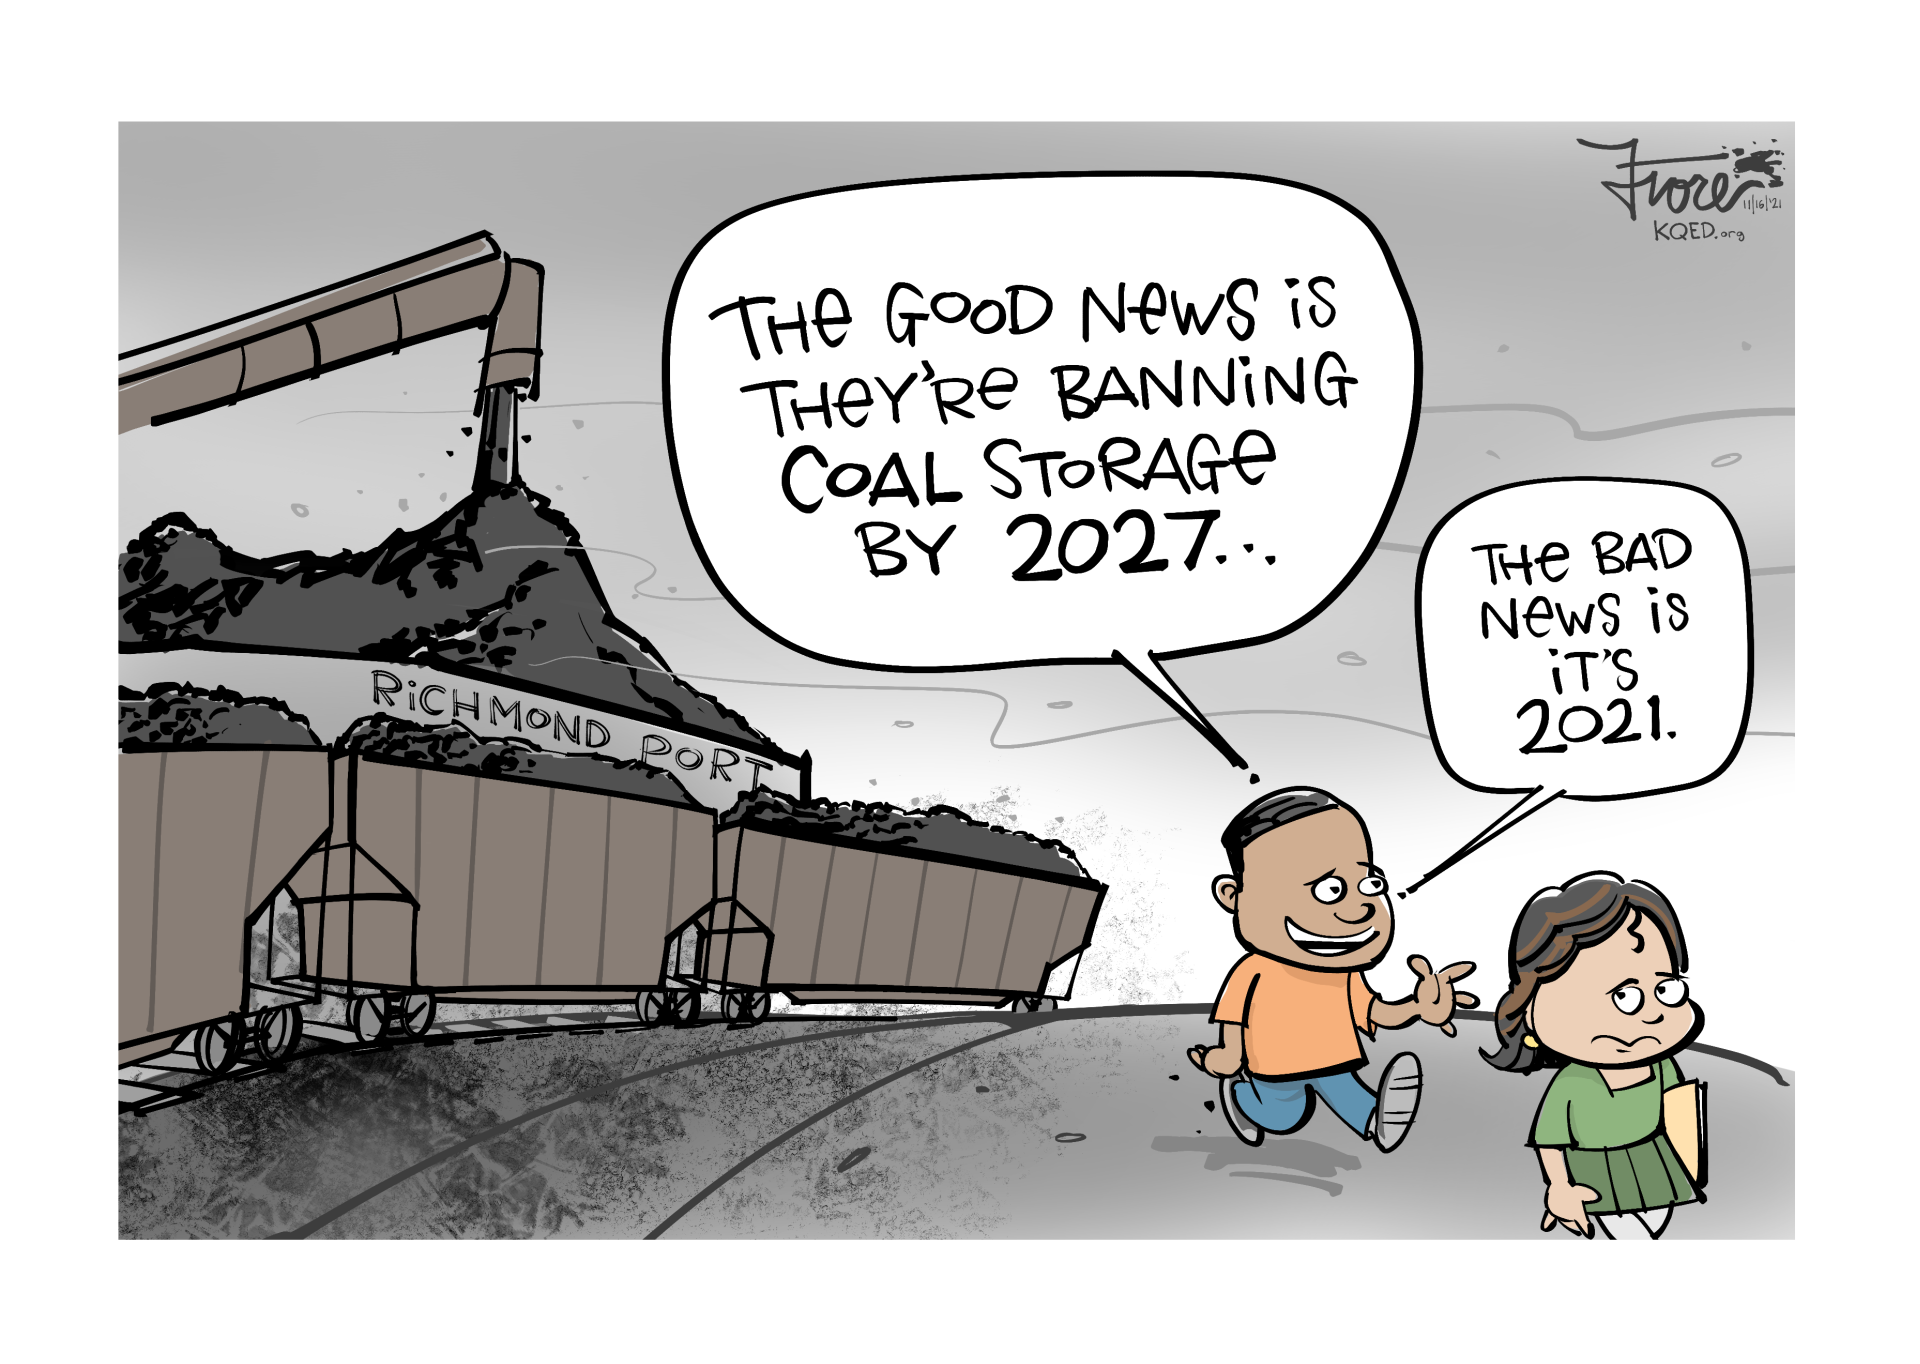 Cartoon: A dirty coal train port terminal with a young boy and girl walking by. The boy says, "the good news is they're banning coal storage by 2027, the bad news is it's 2021."